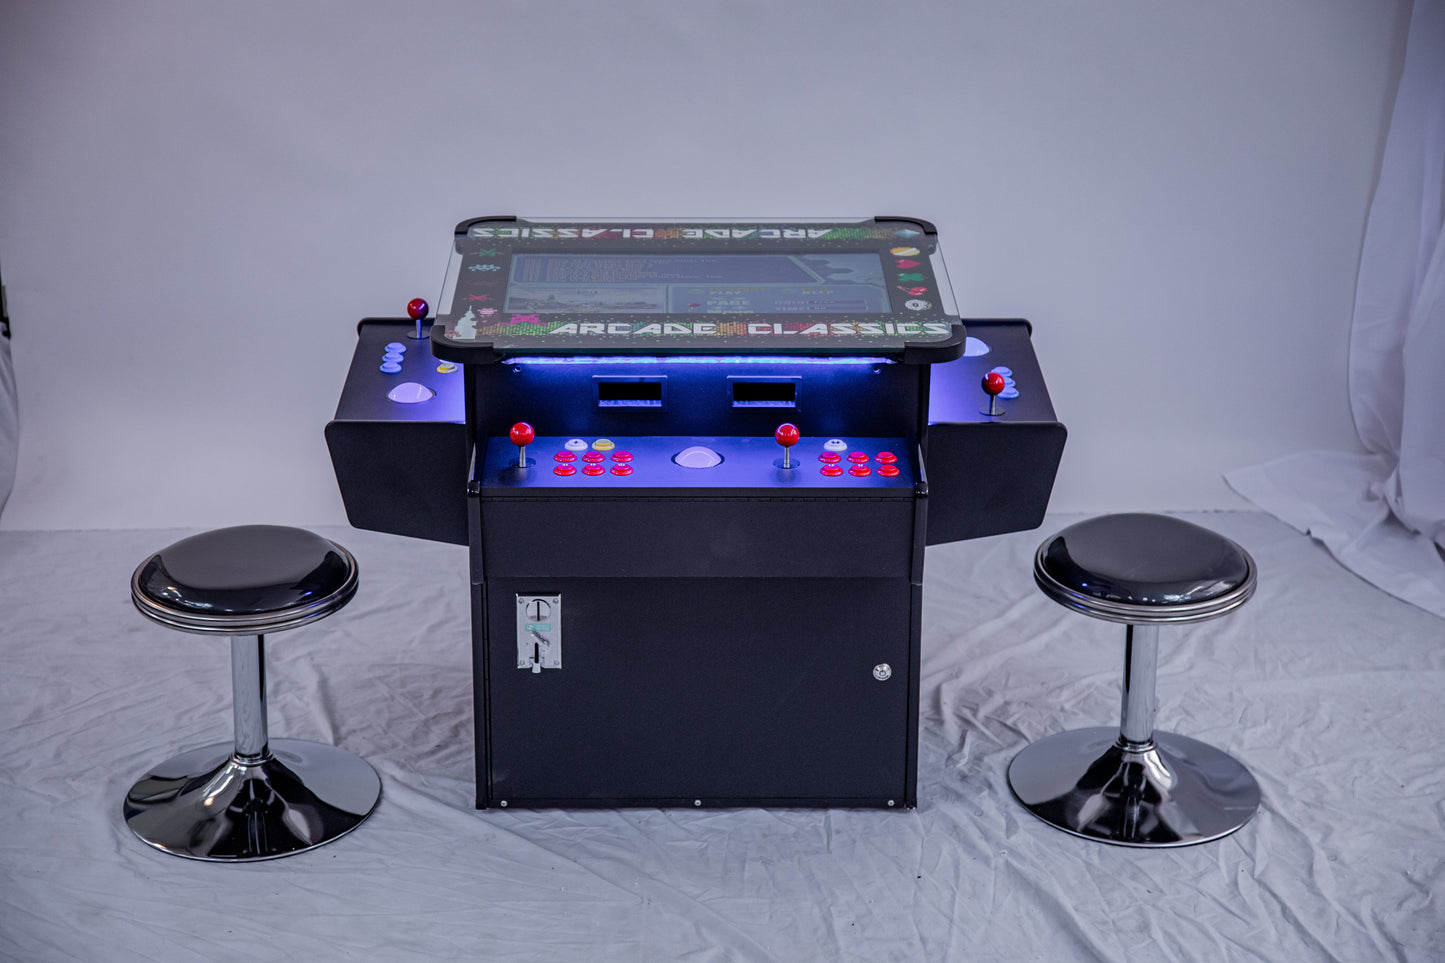 Full-sized, 3 Sided, Cocktail Table Arcade Game With 1,162 Classic, Golden Age, Retro Games, and Trackball